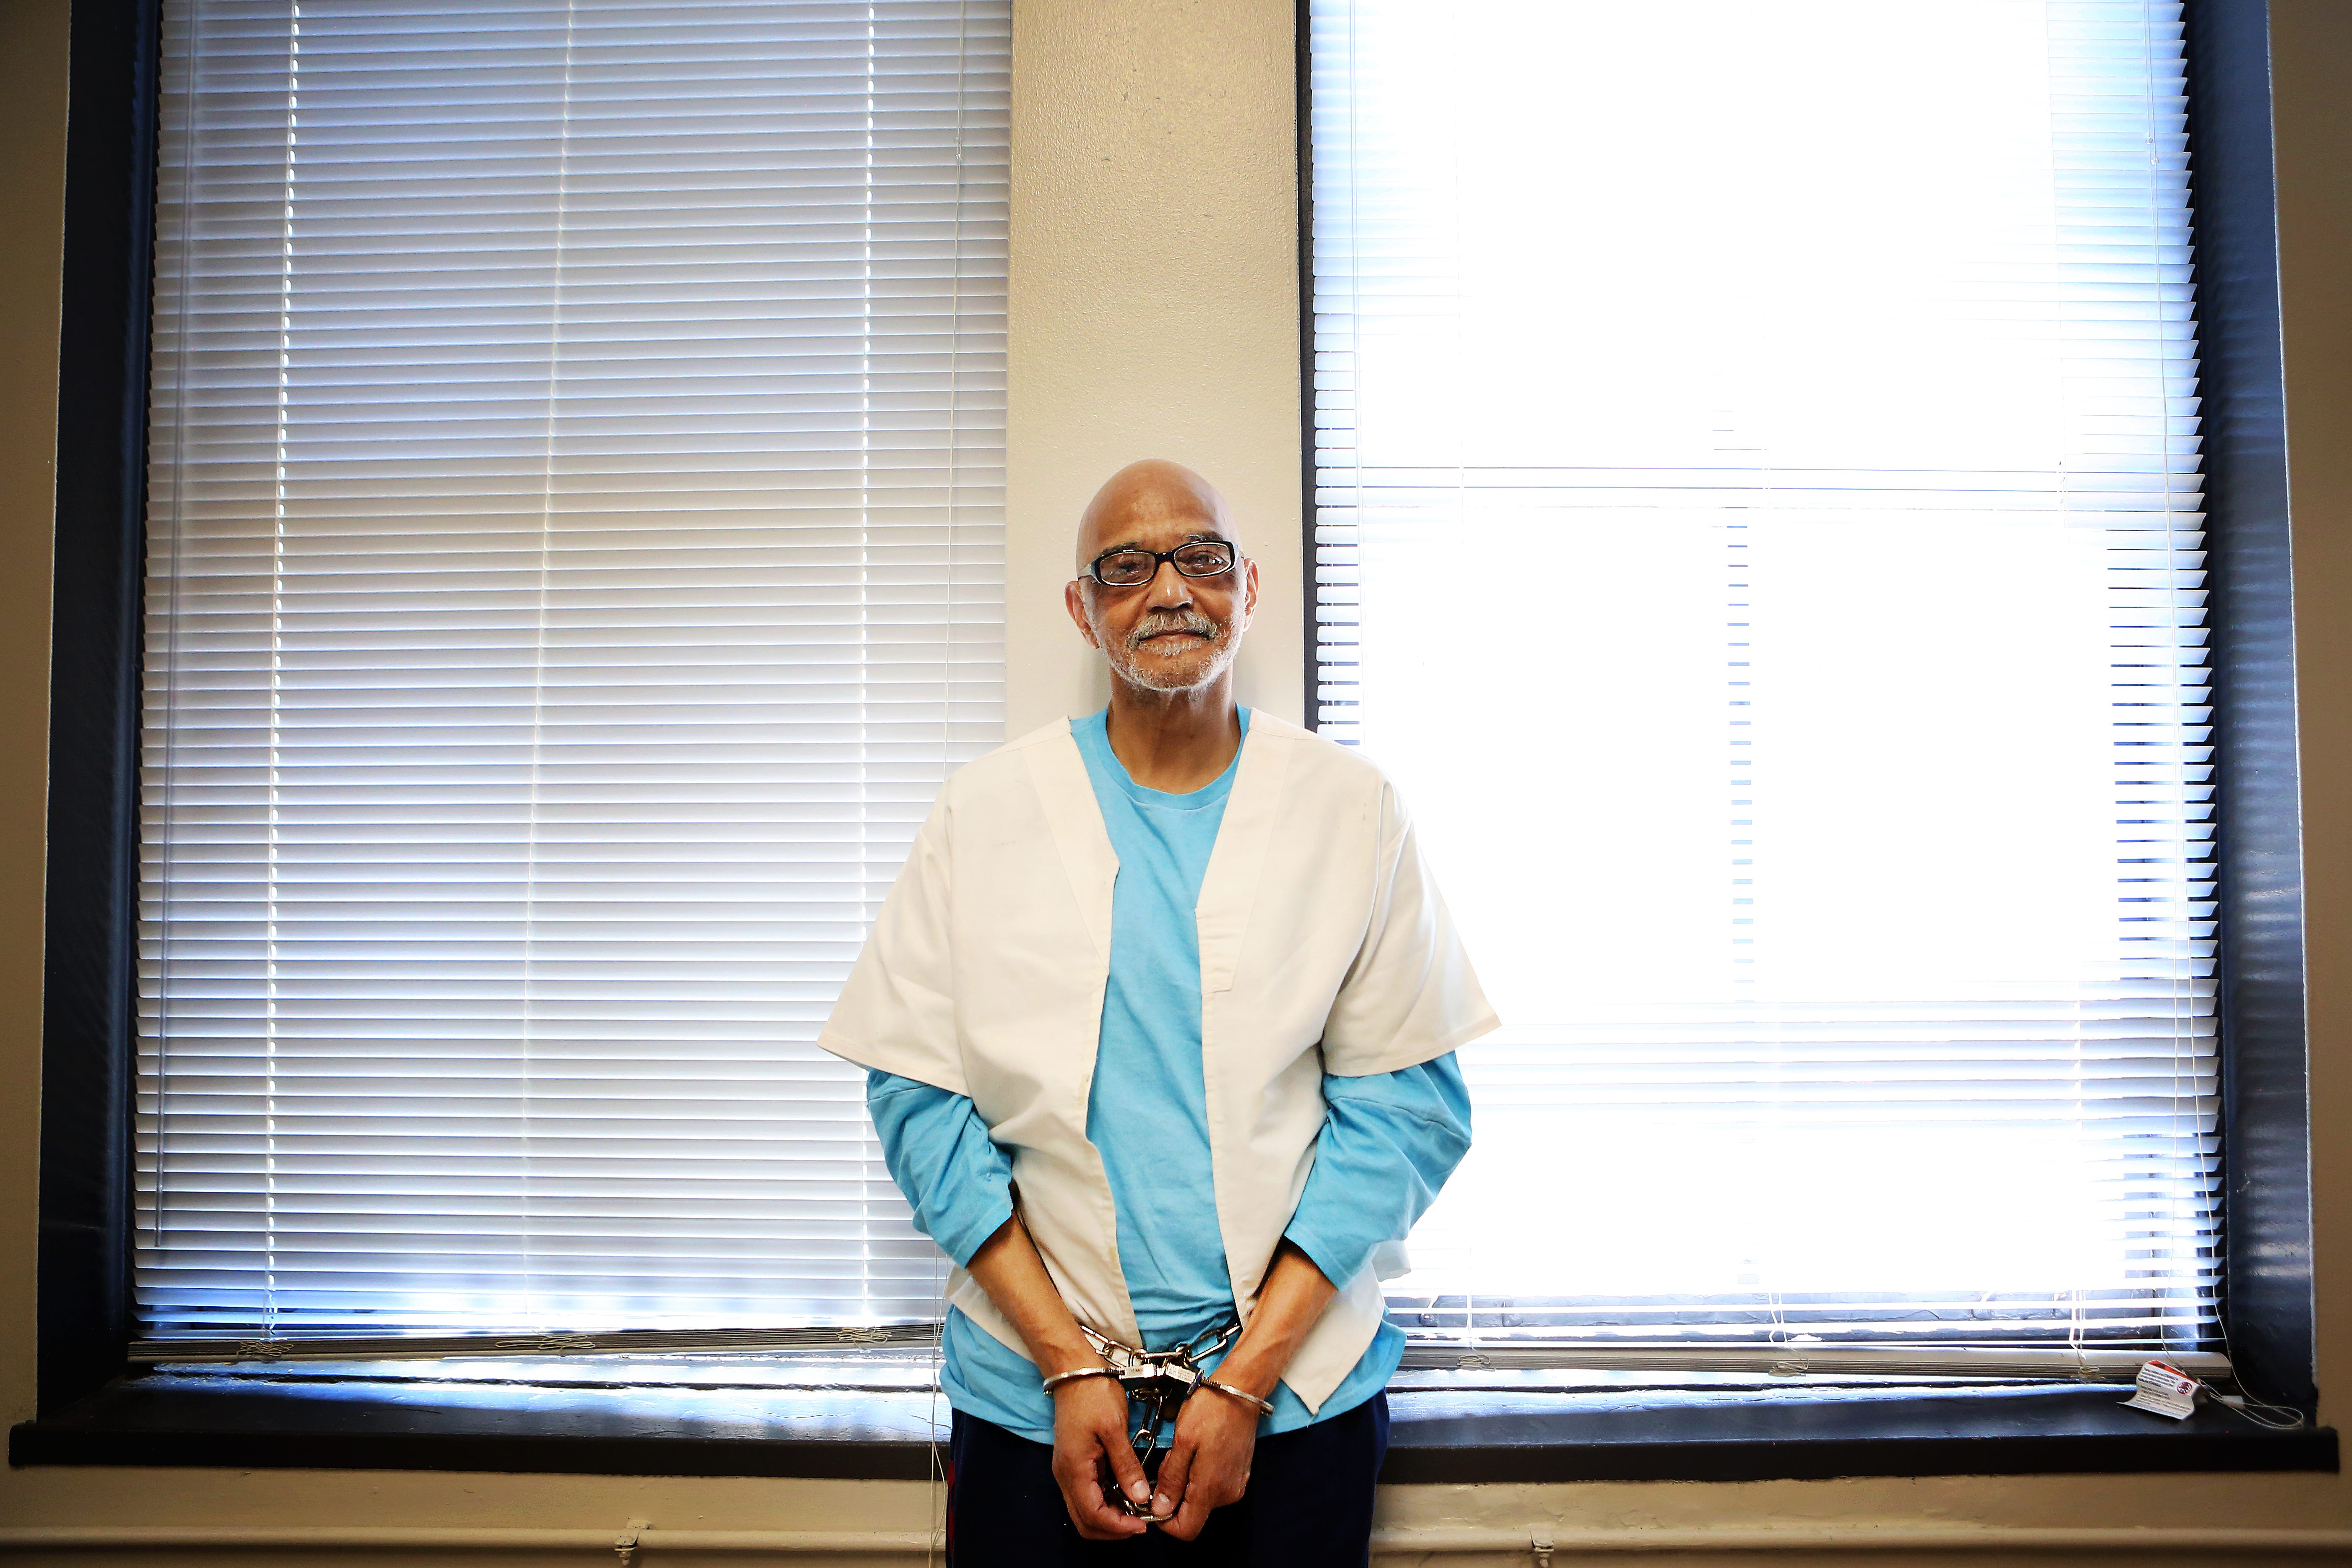 Elwood Jones currently awaits execution on Ohio's death row in the 1994 fatal beating of 67-year-old Rhoda Nathan, a New Jersey native who'd come to Blue Ash for the bar mitzvah of her best friend's grandson.